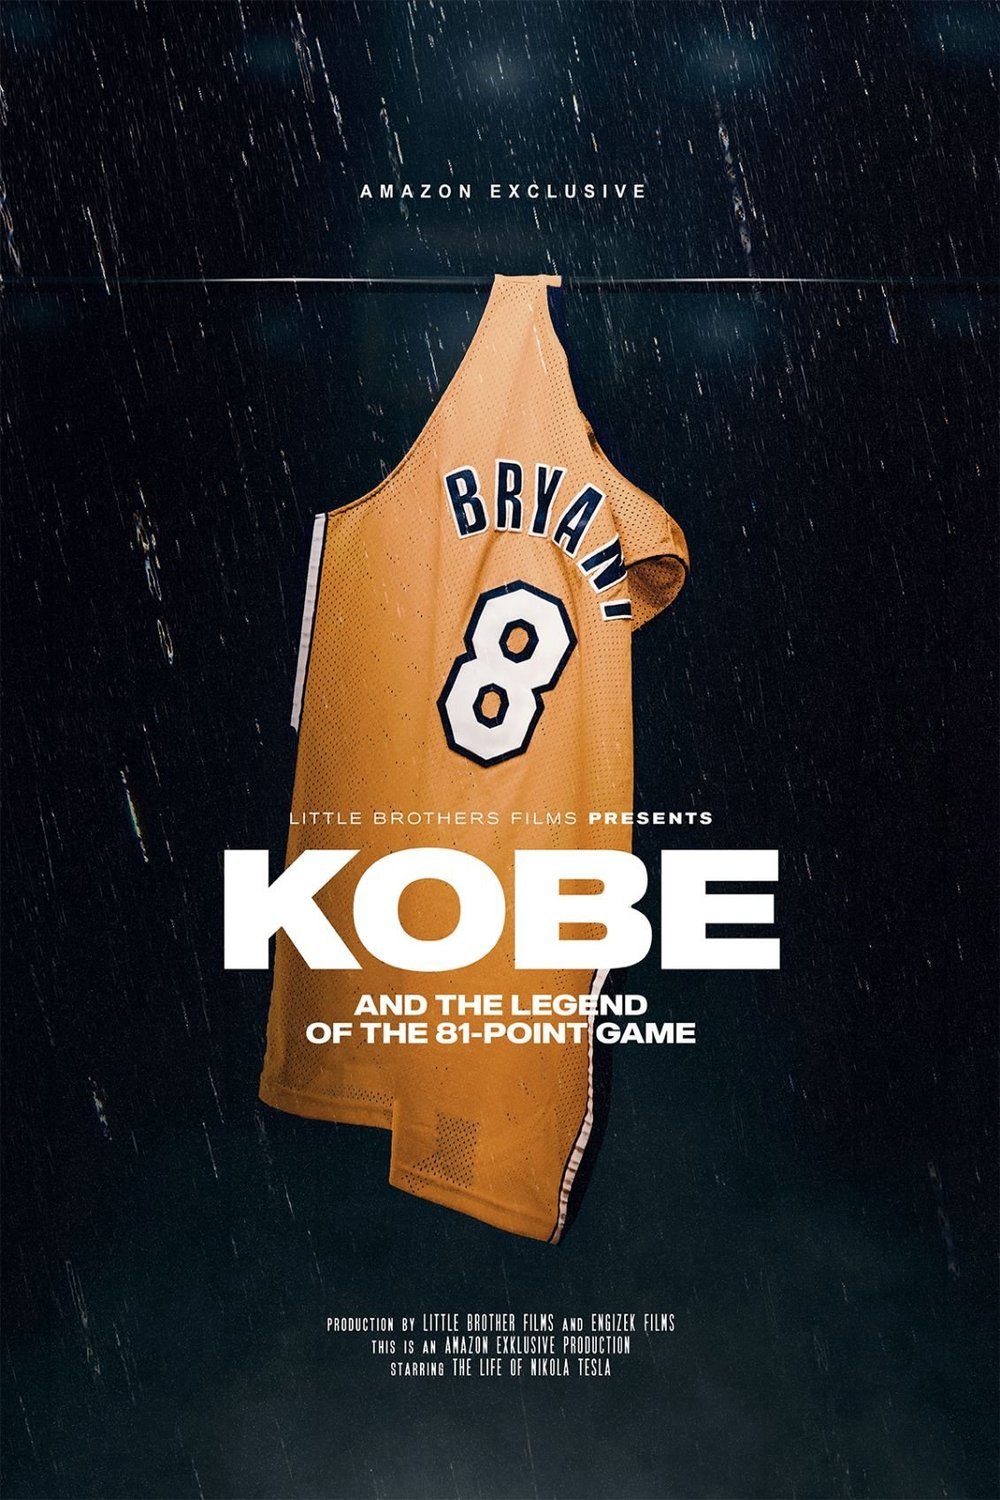 Poster of the movie The Legend of the 81-Point Game